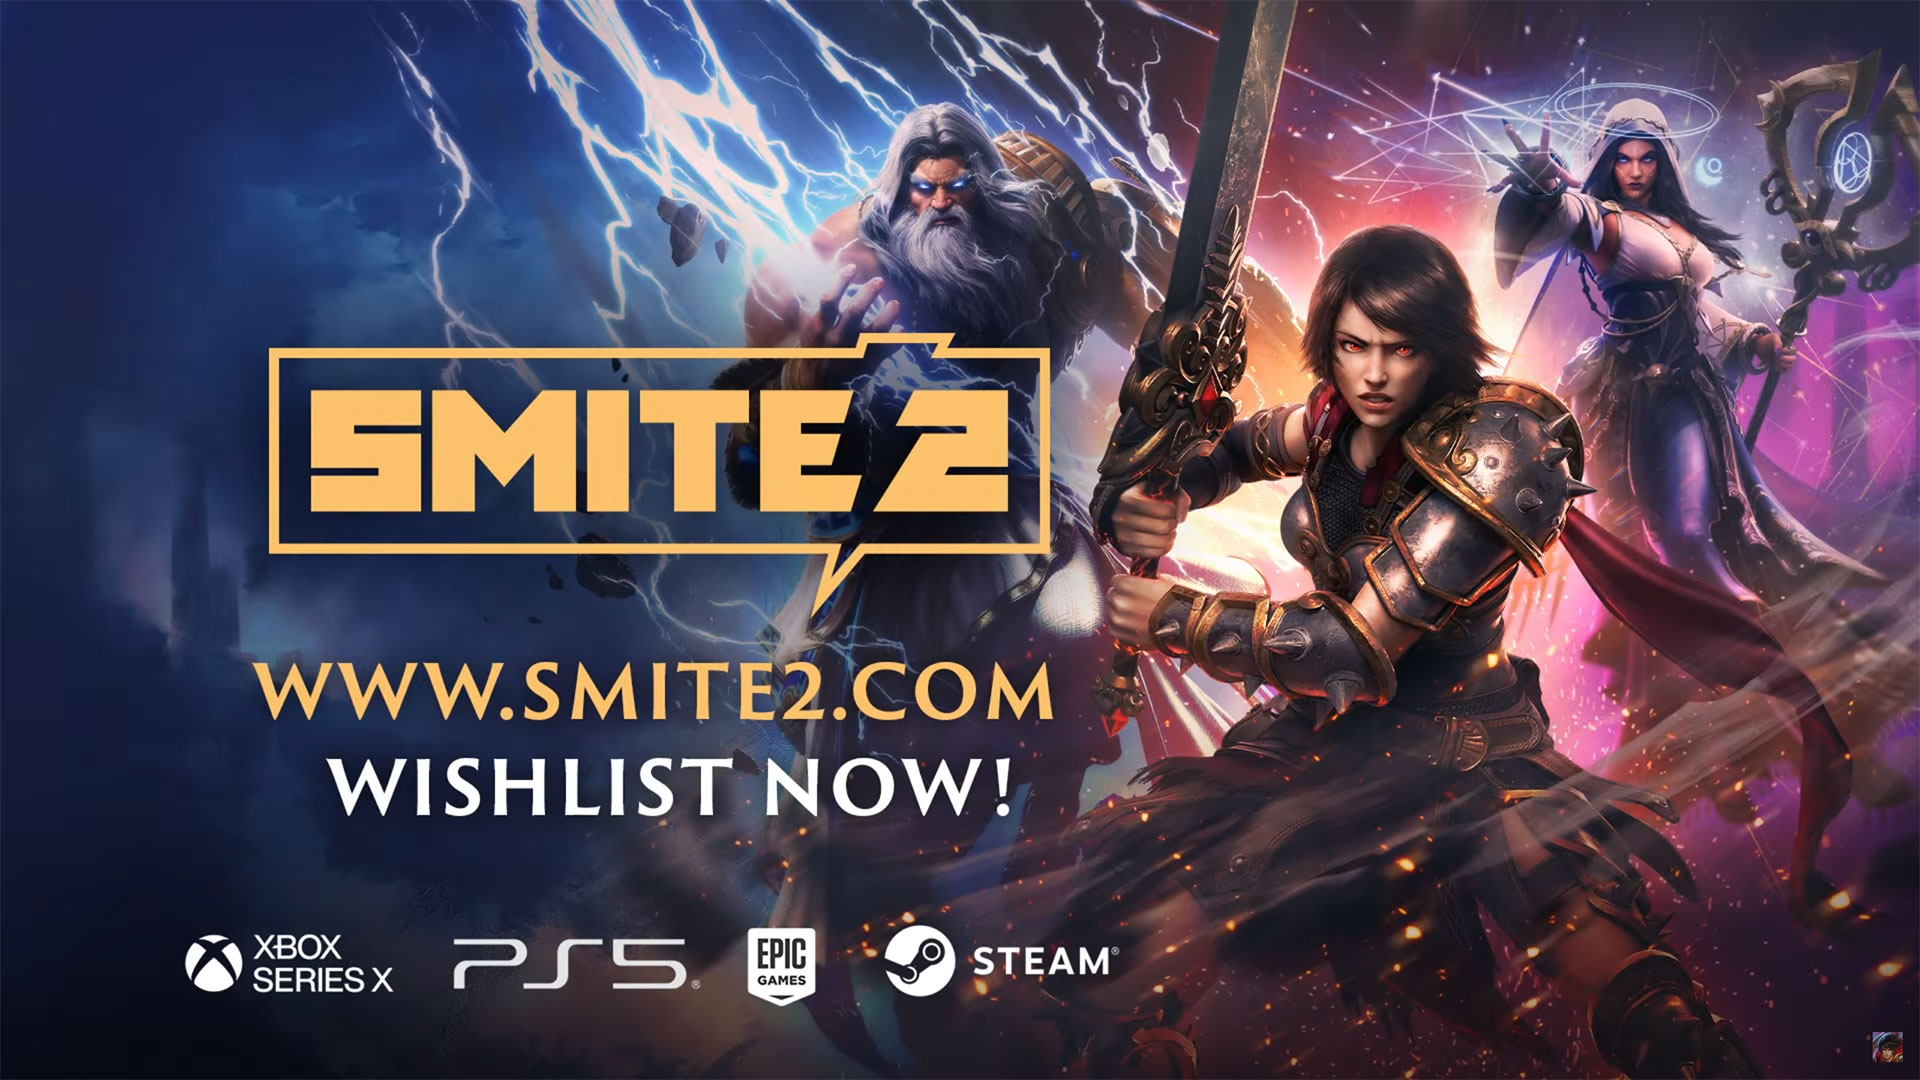 Titan Forge Games has announced Smite 2, which enters Alpha later this year